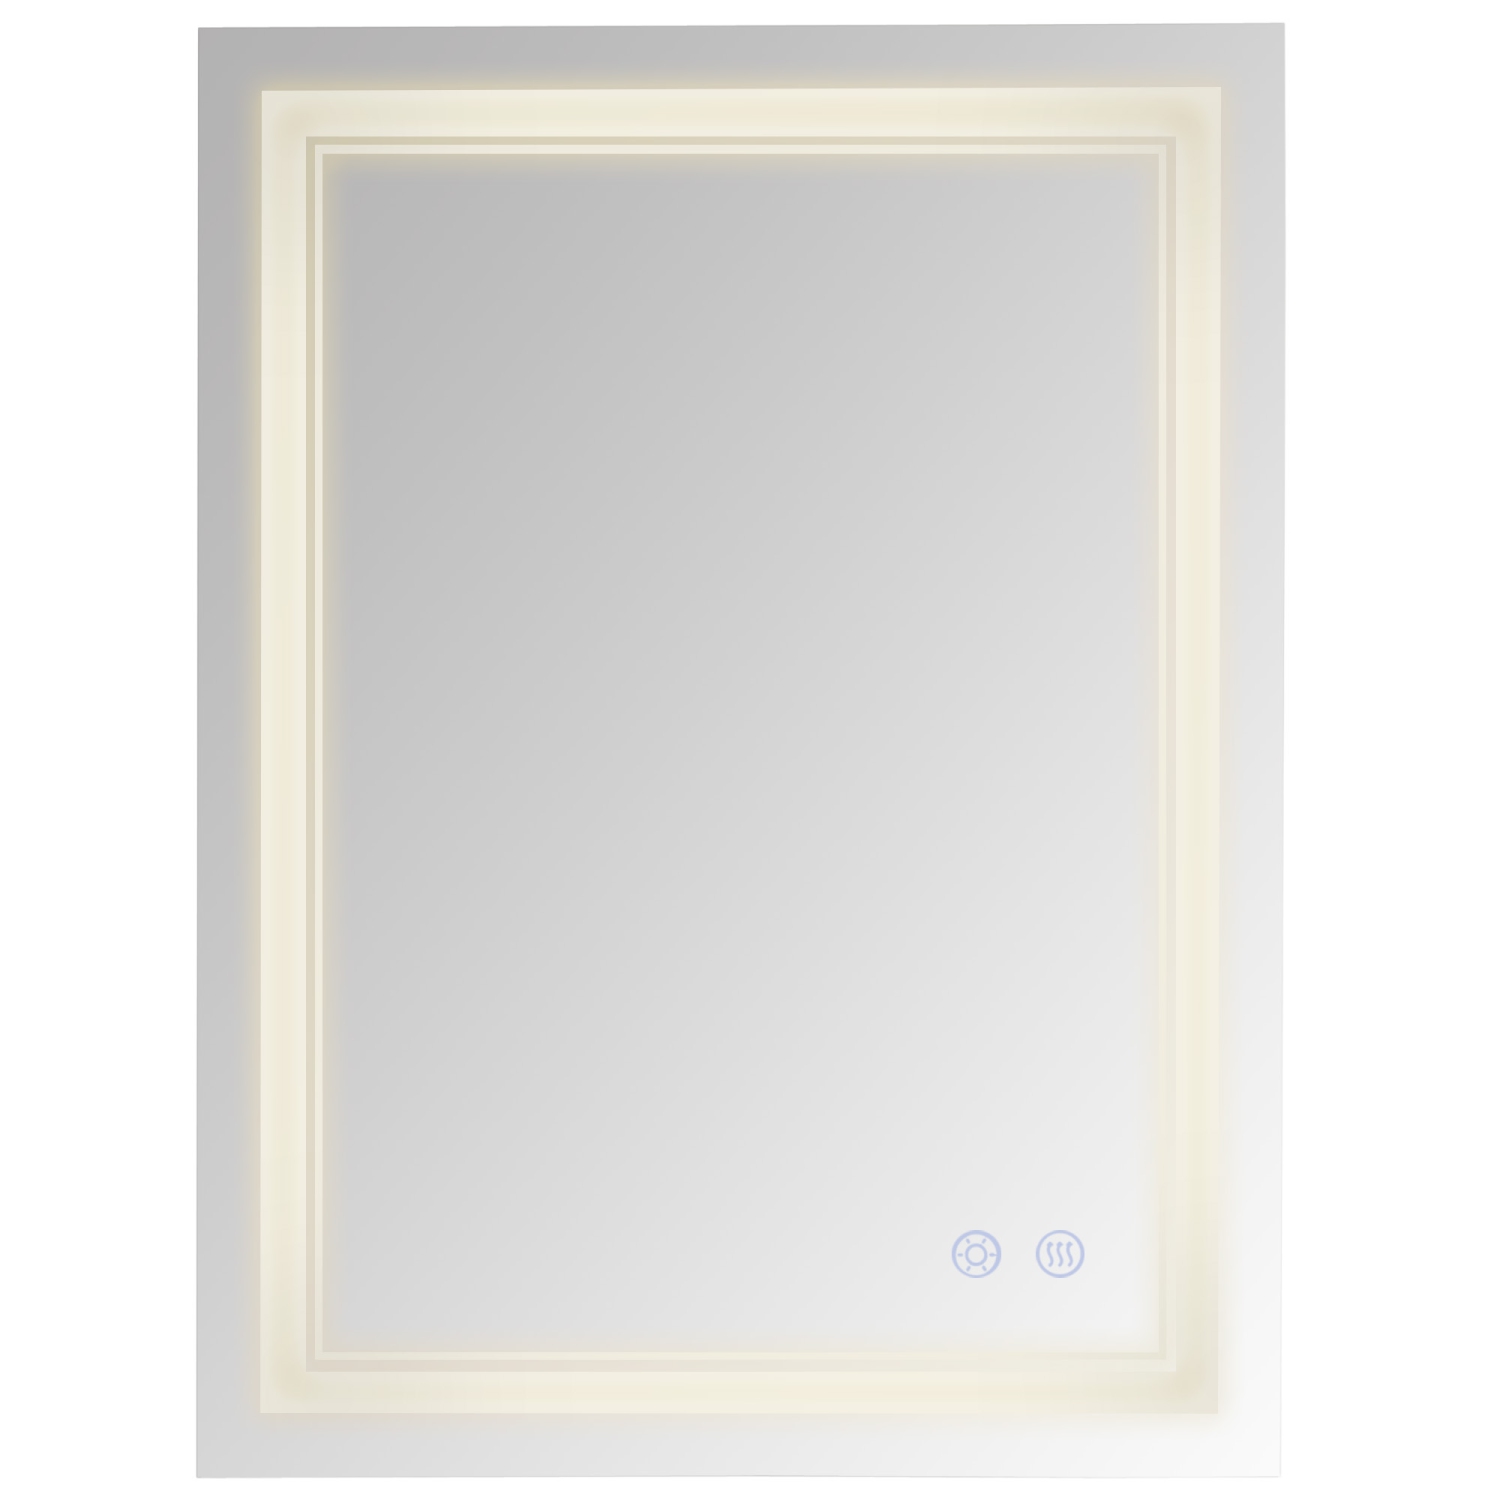 kleankin 24" x 32" LED Bathroom Mirror, Dimmable Lighted Anti Fog Wall-Mounted Mirror, with 3 Colour, Smart Touch, Plug-in, Vertical or Horizontal Hanging